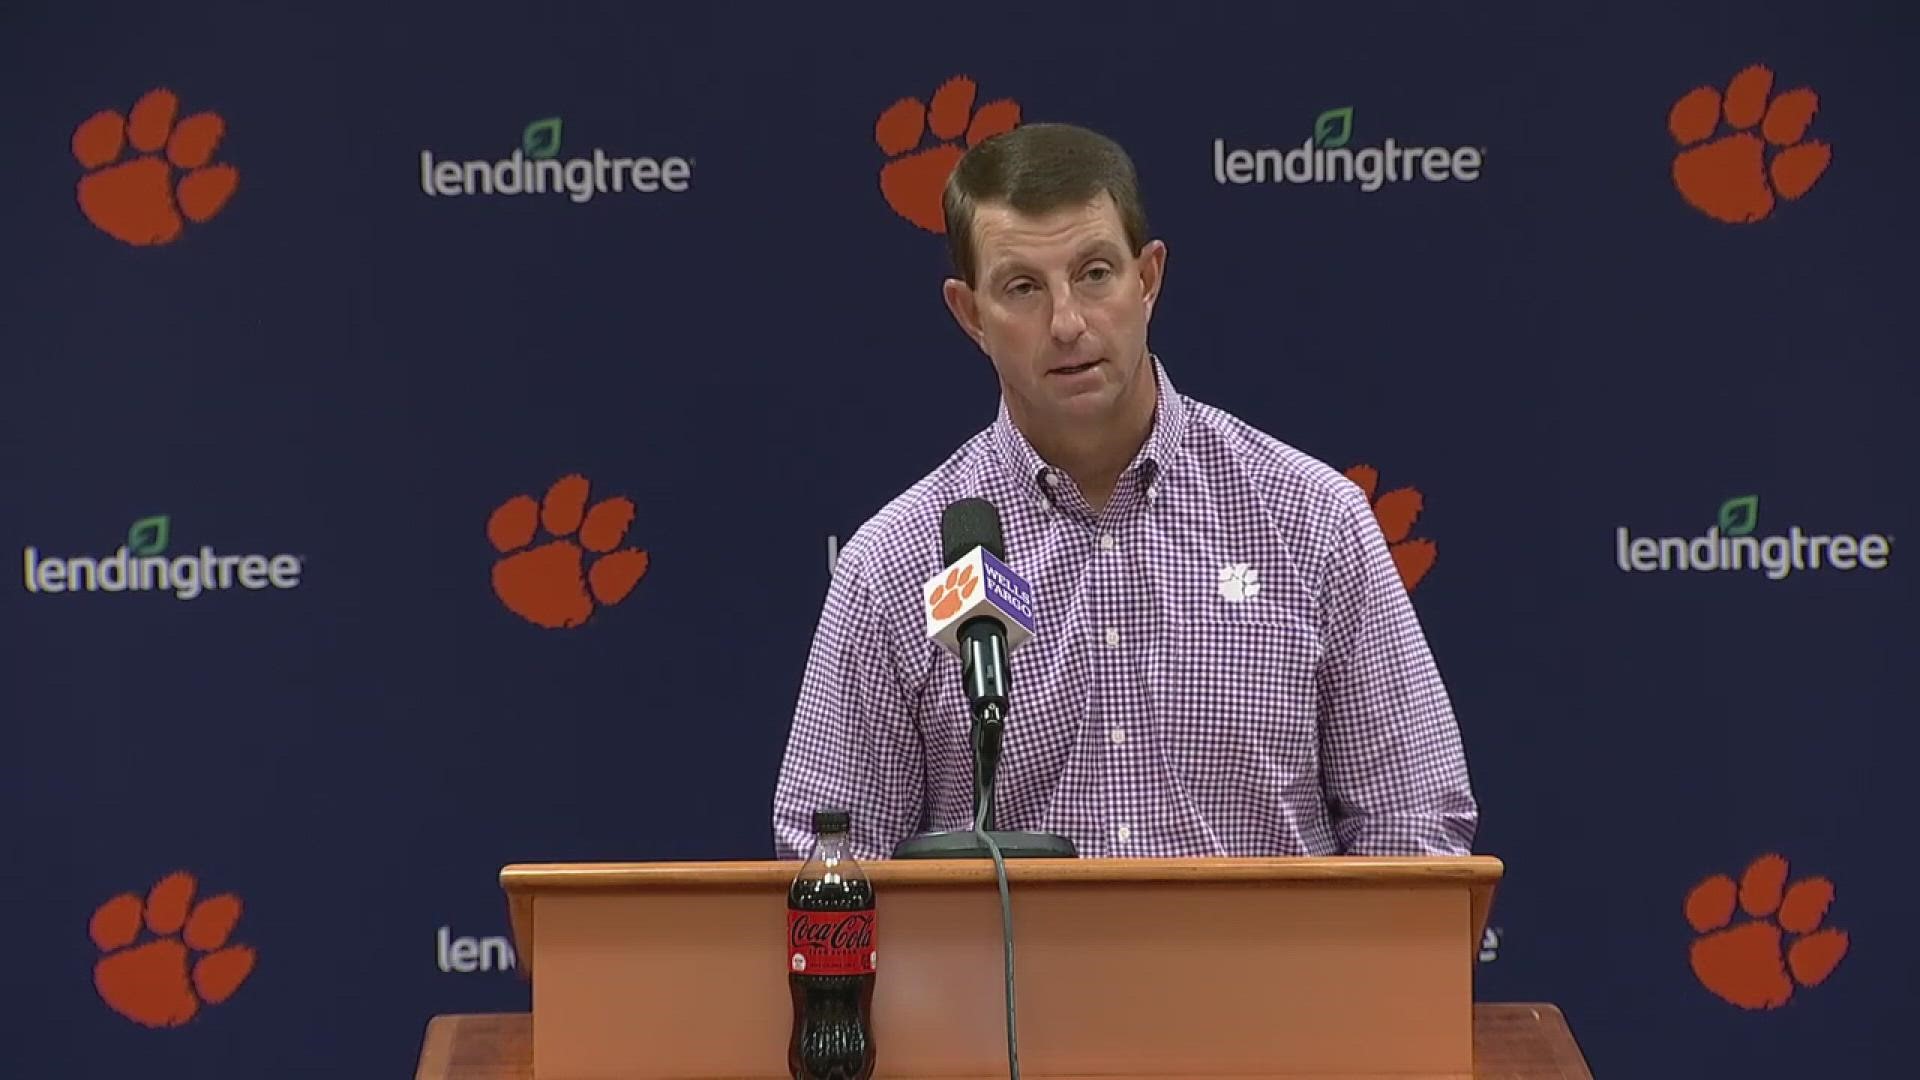 Dabo Swinney and Shane Beamer go in depth abou their relationship and Dabo even goes so far as to mention how Shane's son once wore orange.